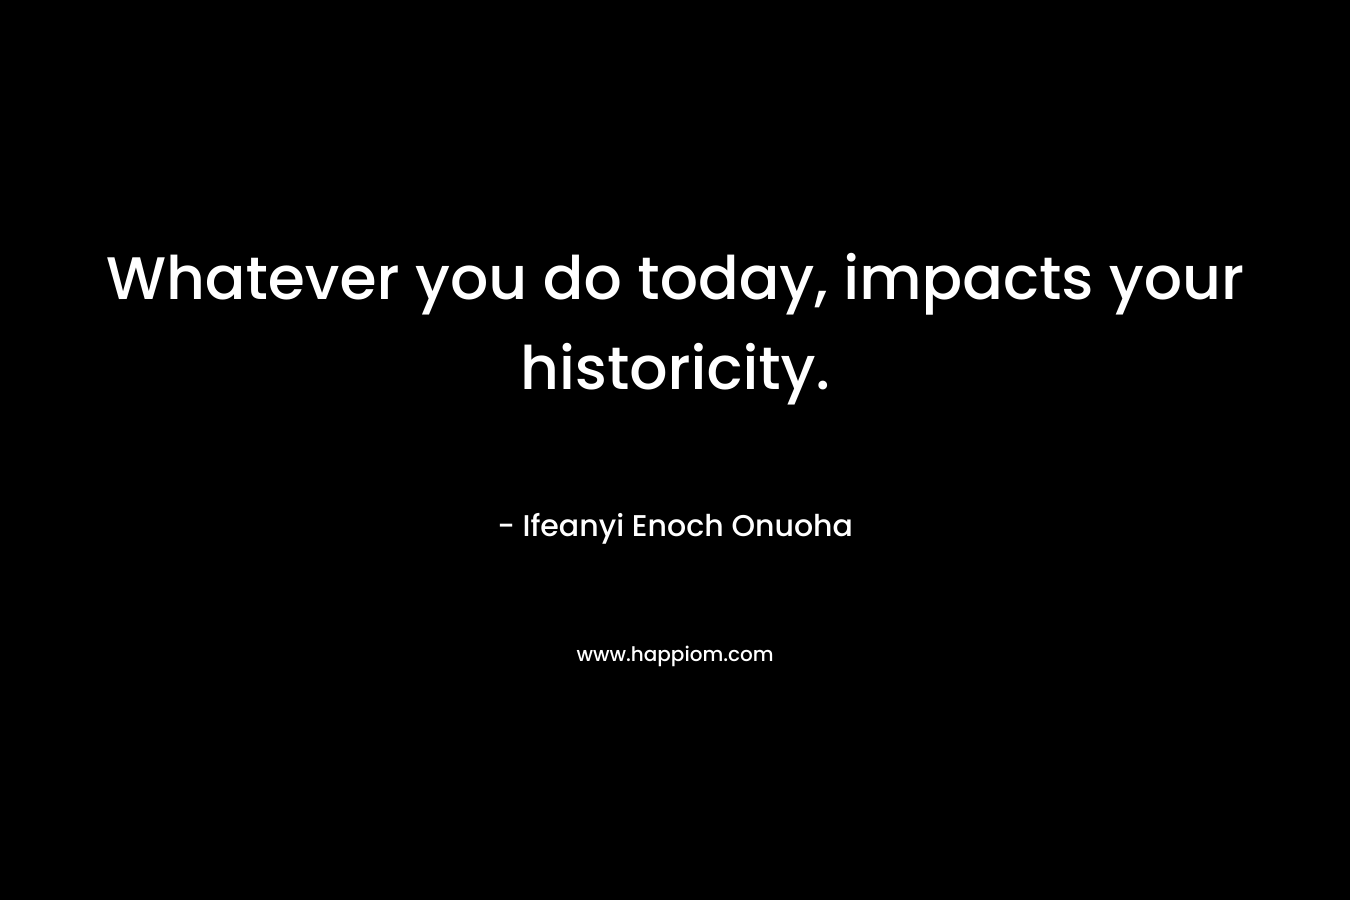 Whatever you do today, impacts your historicity.